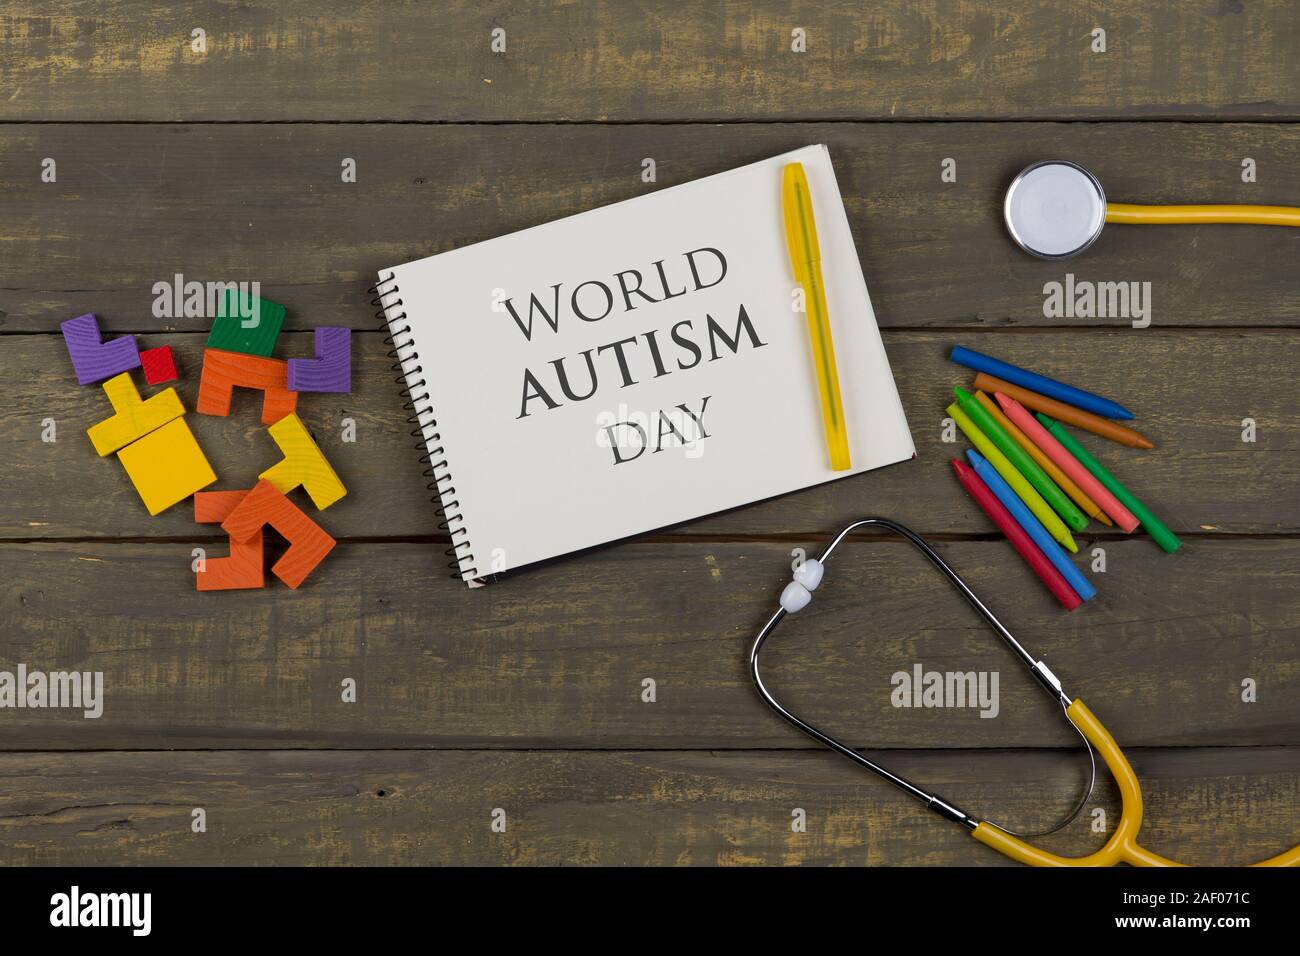 Mental health concept - text World Autism day, notepad, yellow stethoscope, colorful wooden jigsaw puzzles, crayons on wooden background Stock Photo